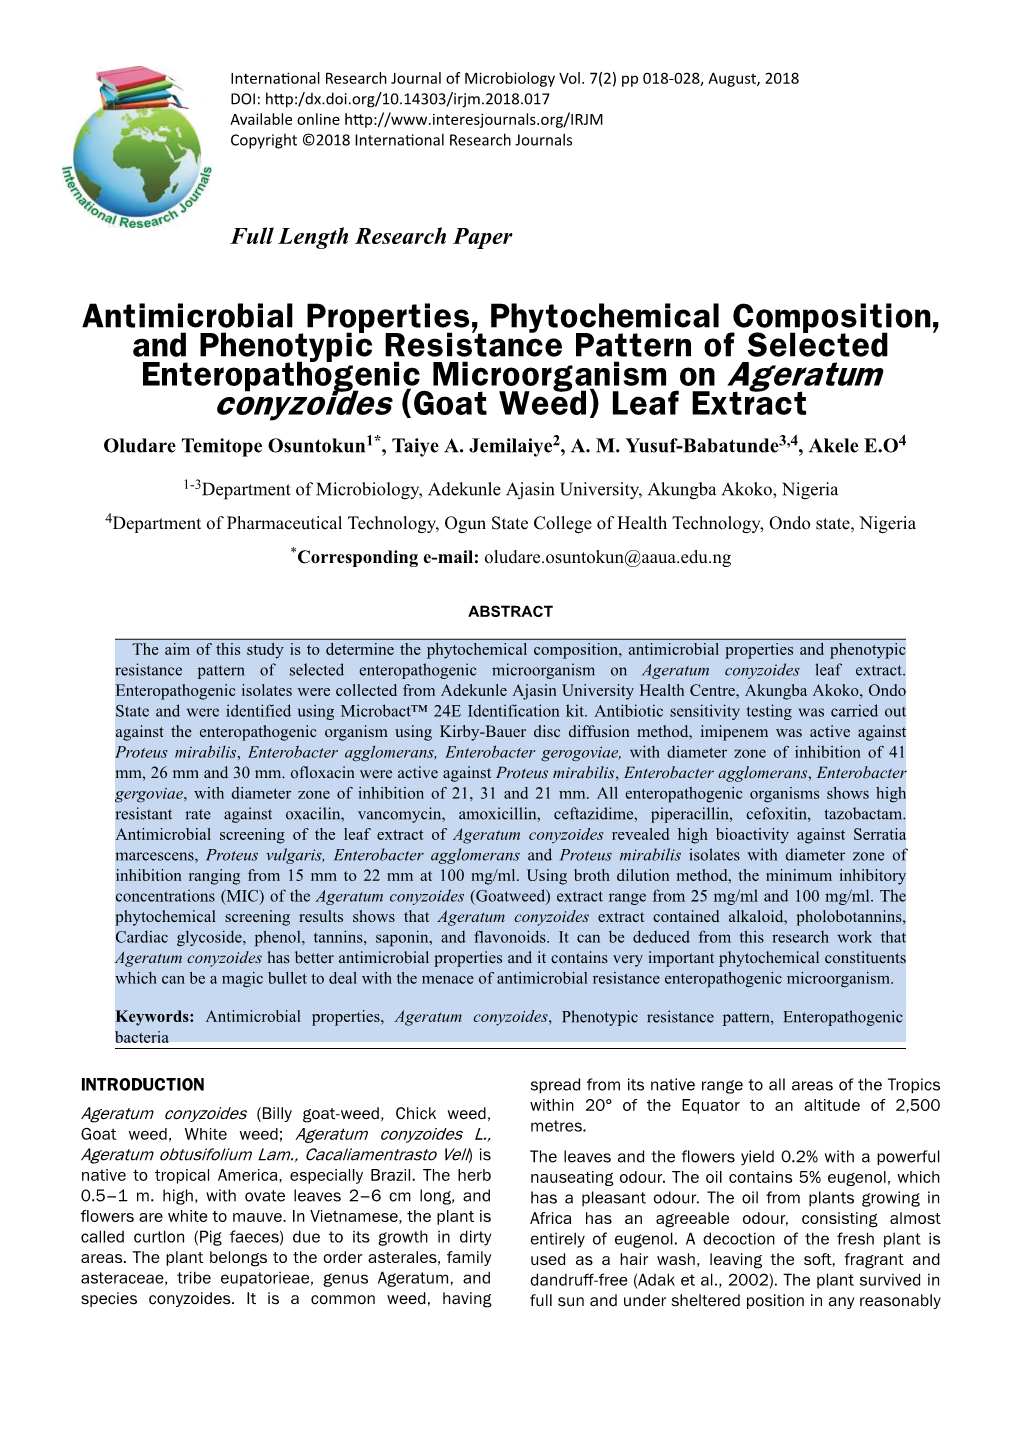 Antimicrobial Properties, Phytochemical Composition, and Phenotypic Resistance Pattern of Selected Enteropathogenic Microorganis